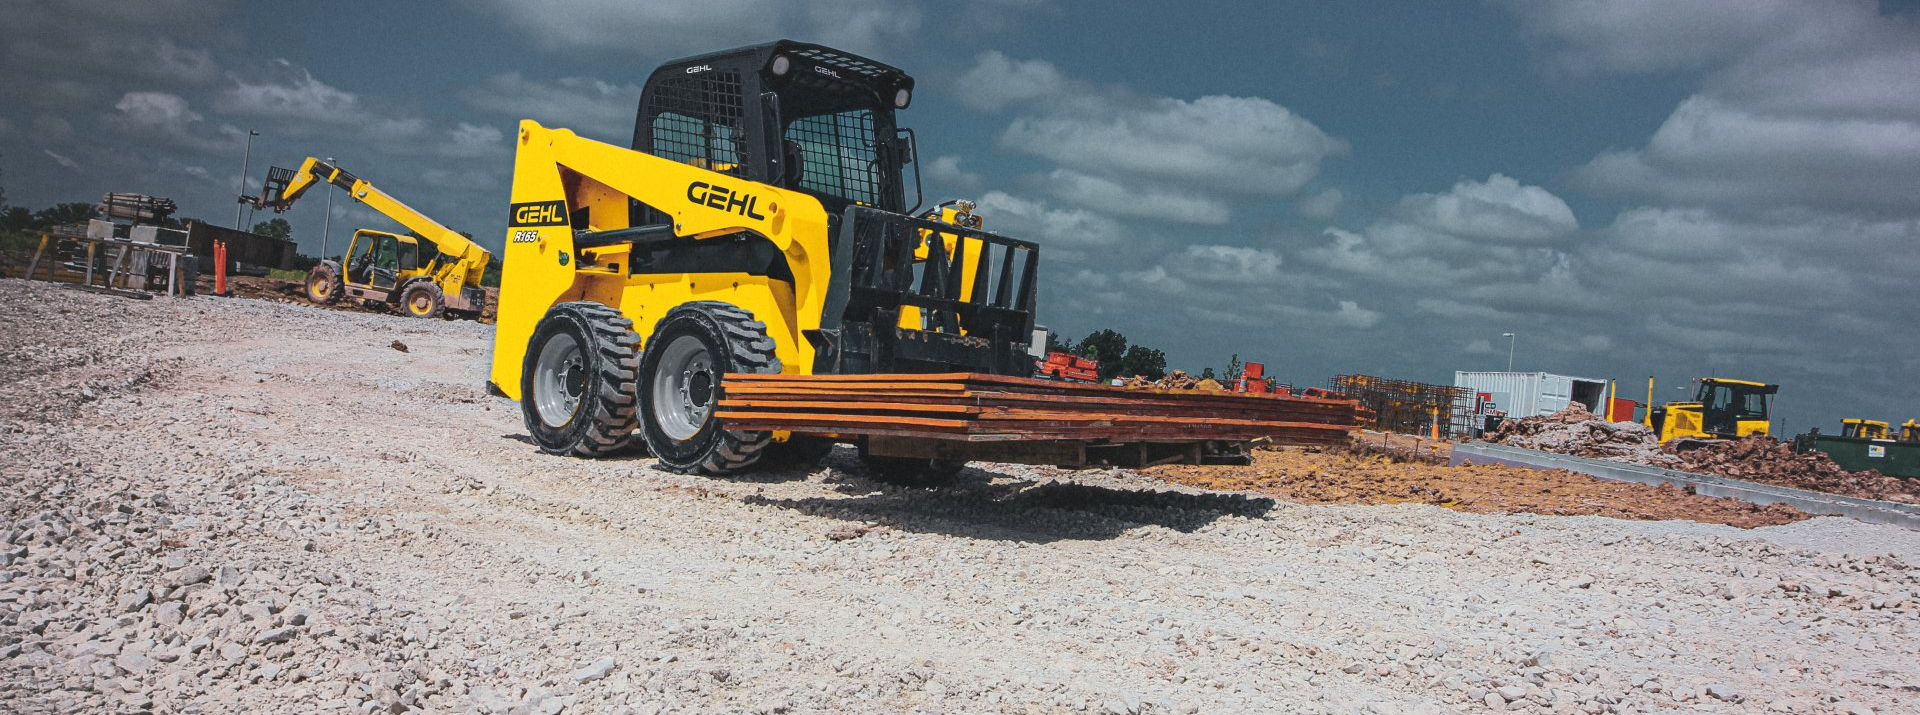 gehl r165 skid steer photo with fork lifts